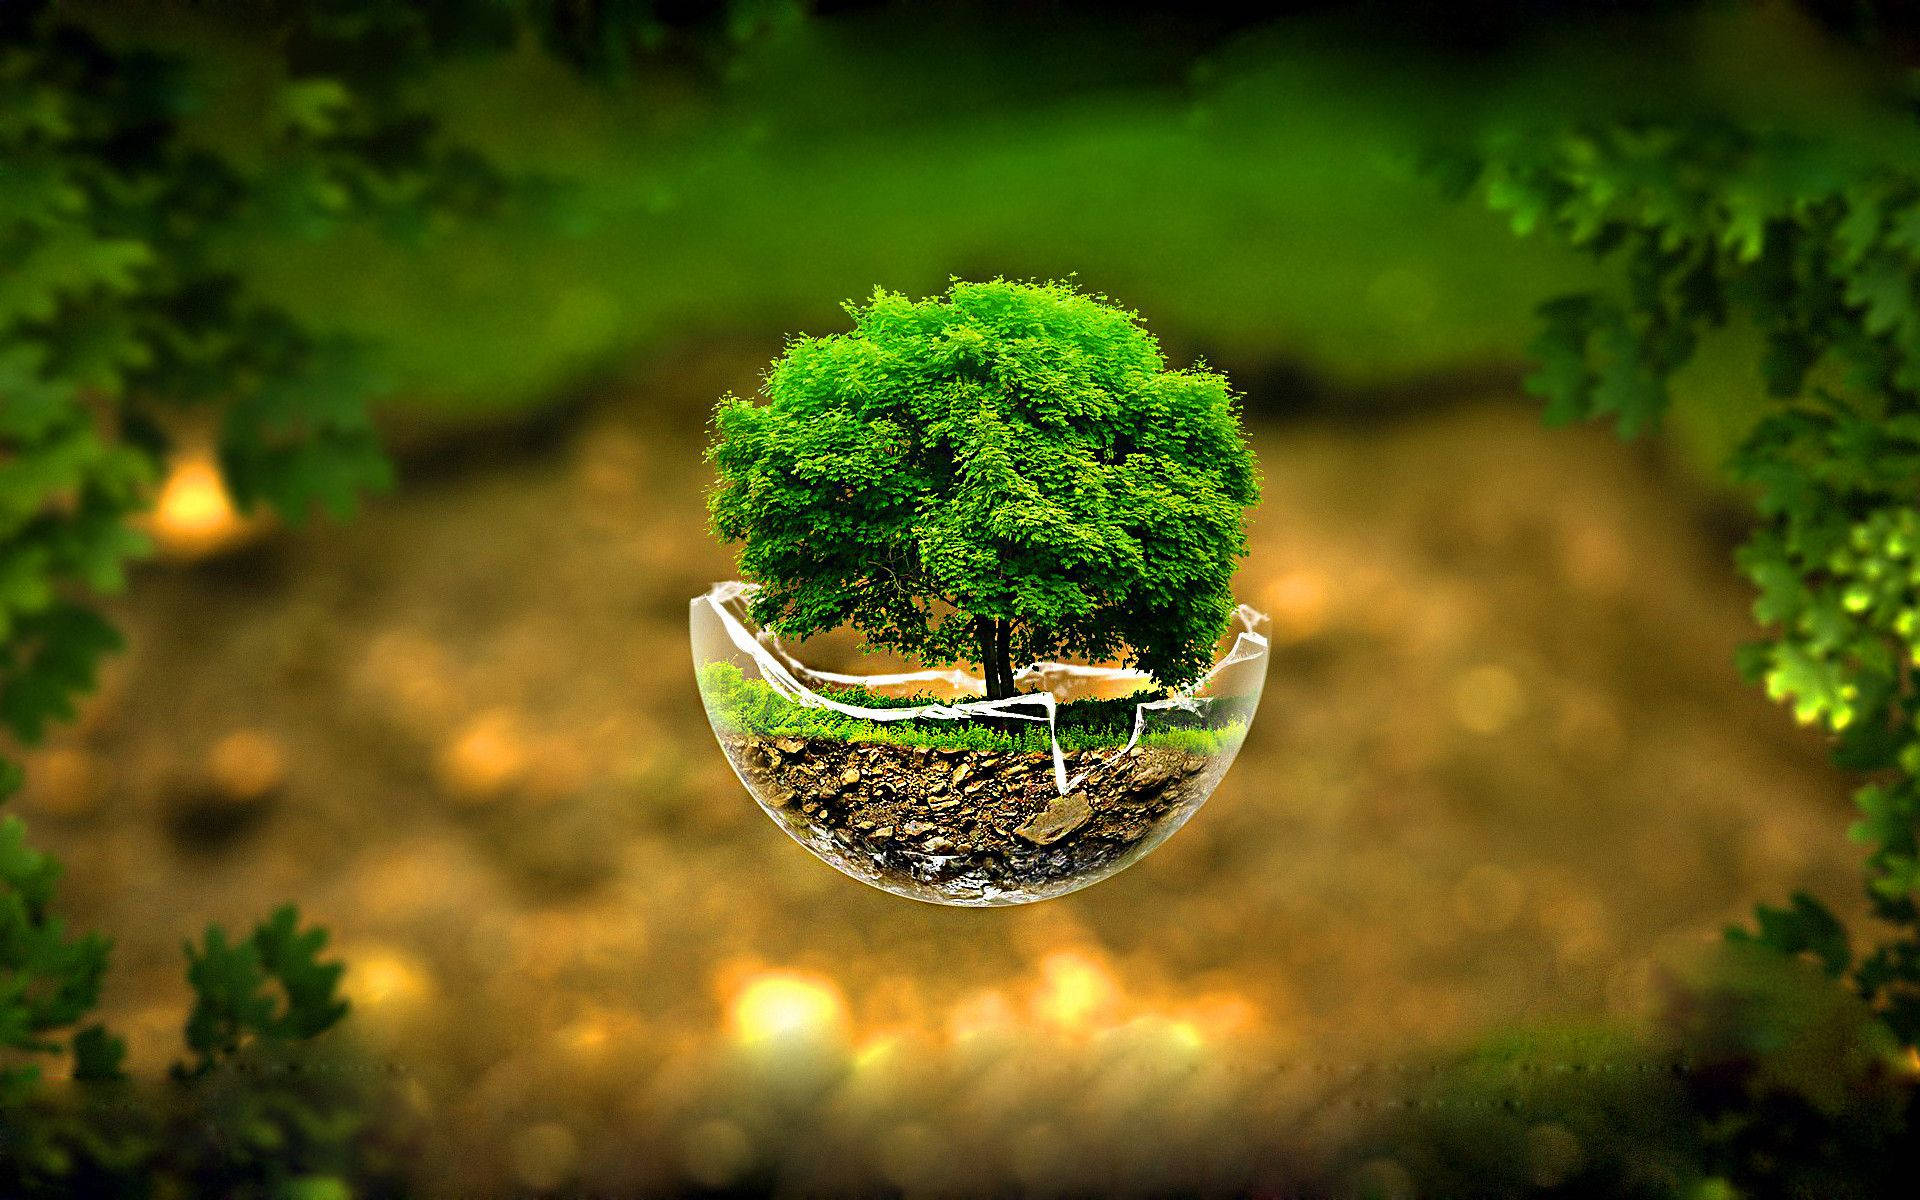 3D tree with thick green foliage inside a broken glass ball wallpaper.